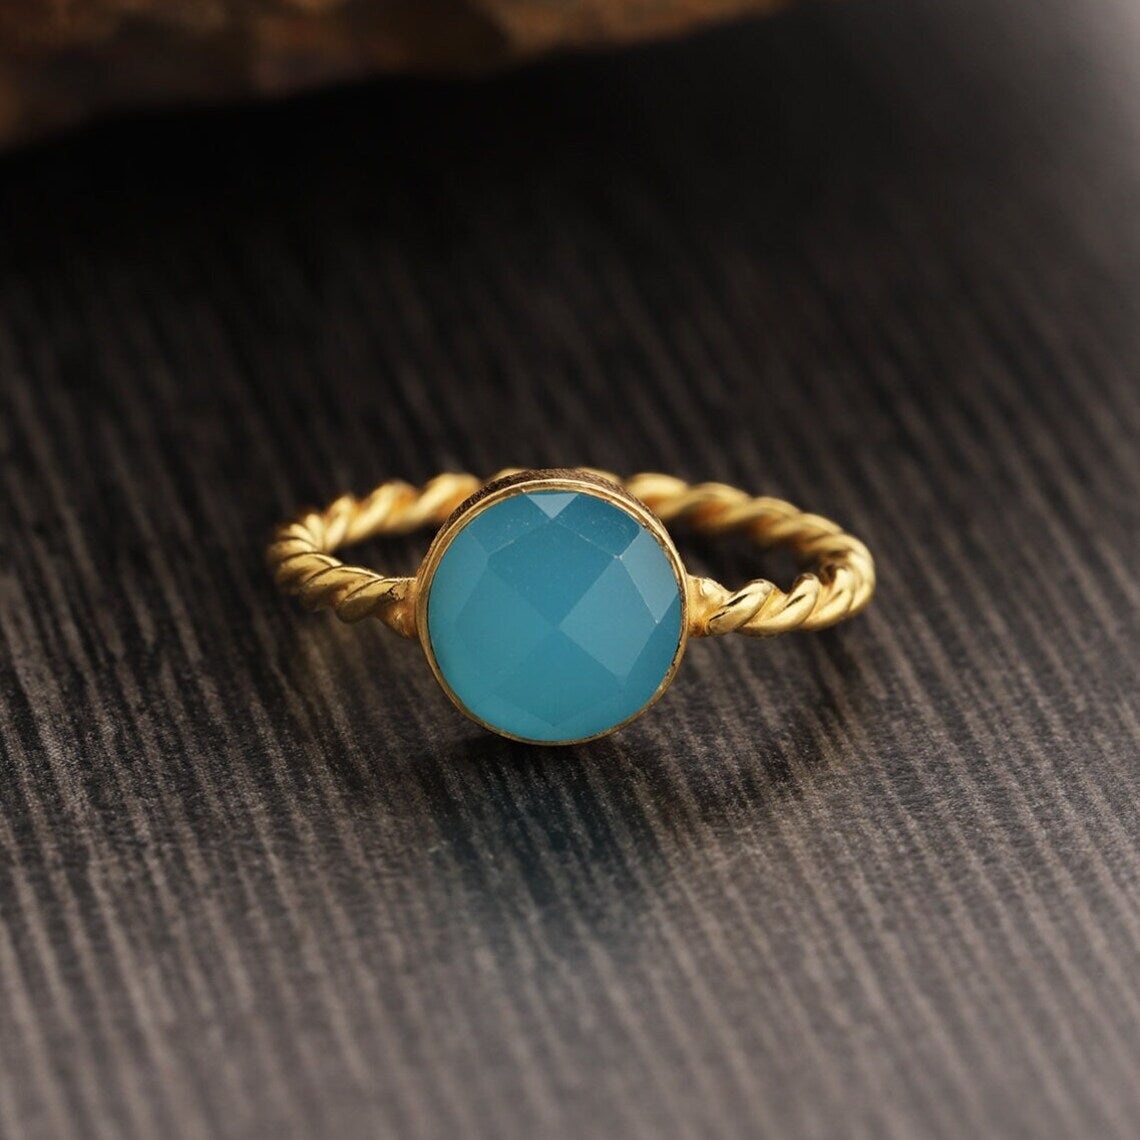 Blue Chalcedony ring, trendy designs for her, gold ring, Round chalcedony ring, cobalt blue gemstone, birthstone ring birthday gifts for her